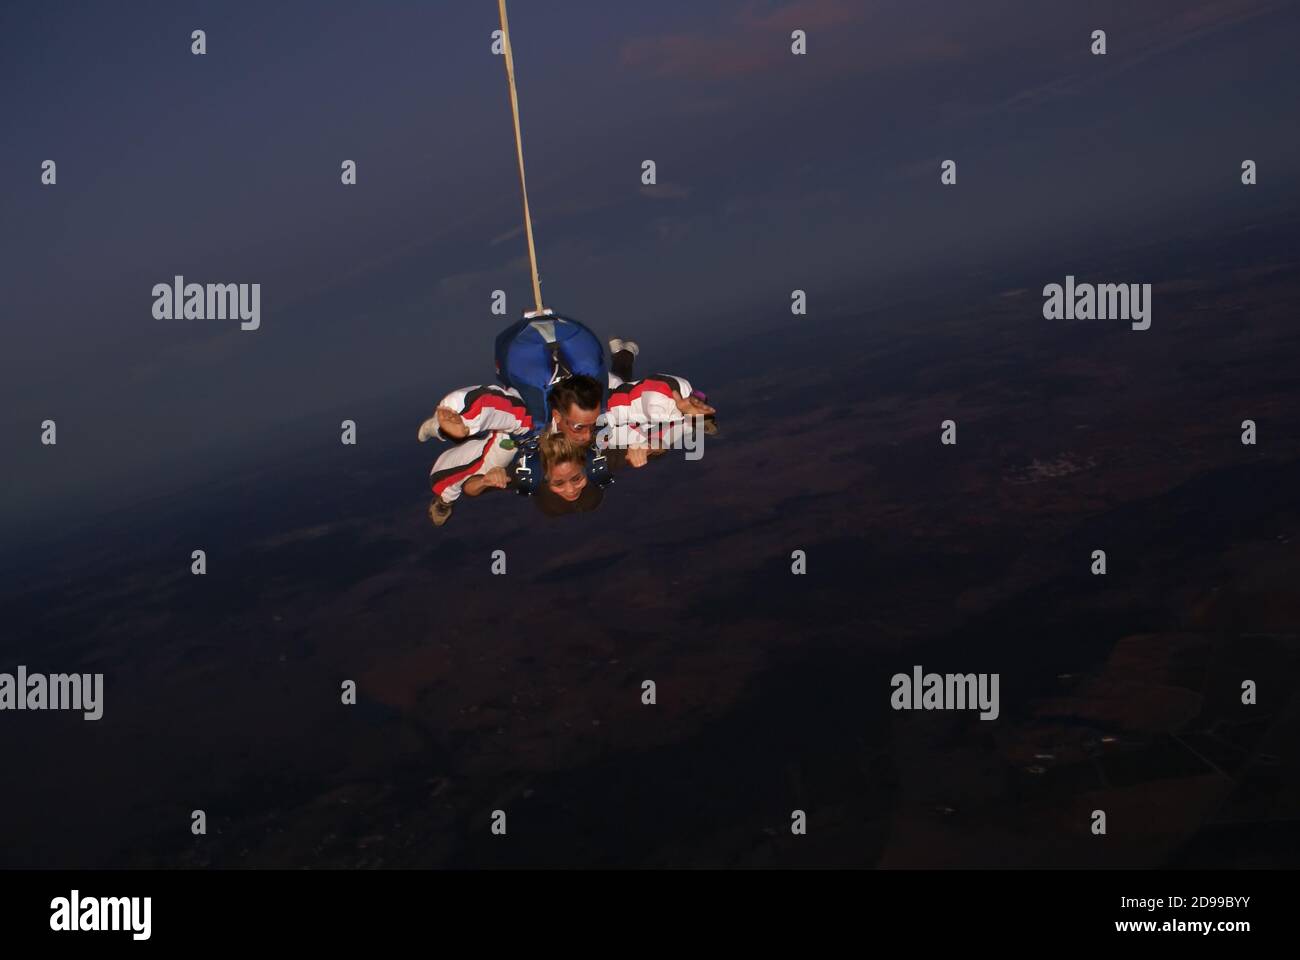 A woman tourist jumps on a parachute at dusk in Évora Portugal - October 24, 2009 Stock Photo